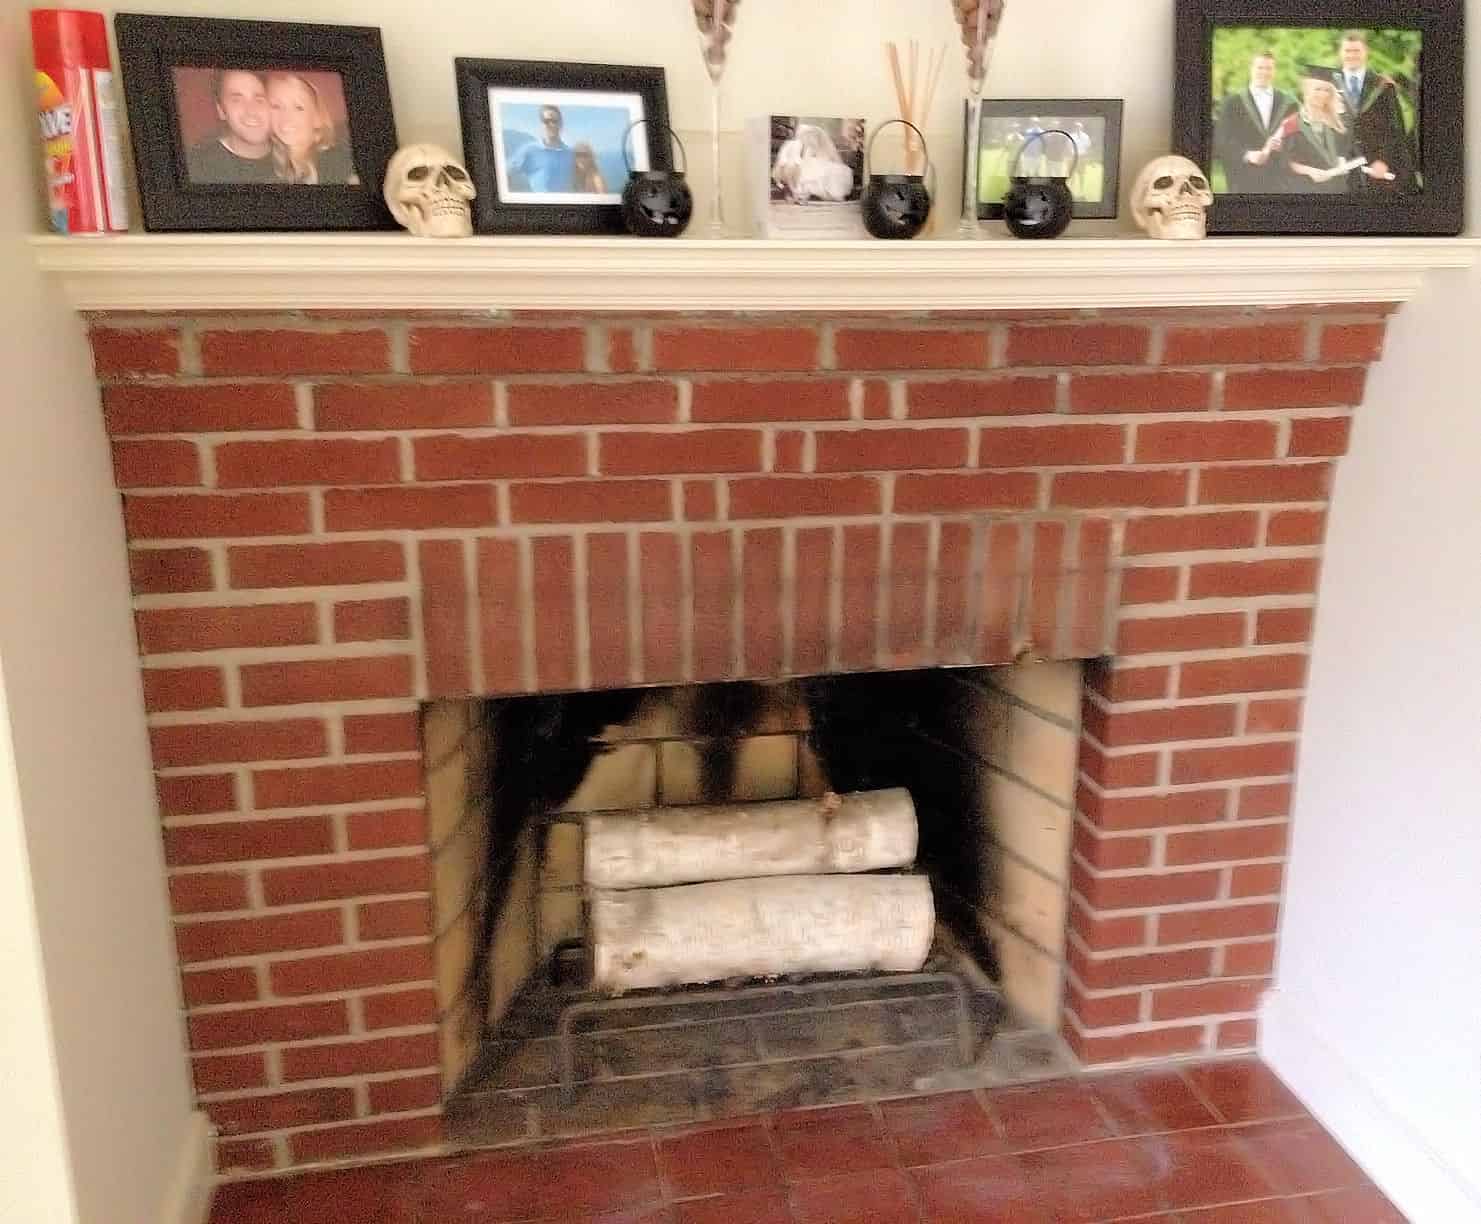 How To Whitewash A Brick Fireplace An, Red Brick Fireplace White Walls